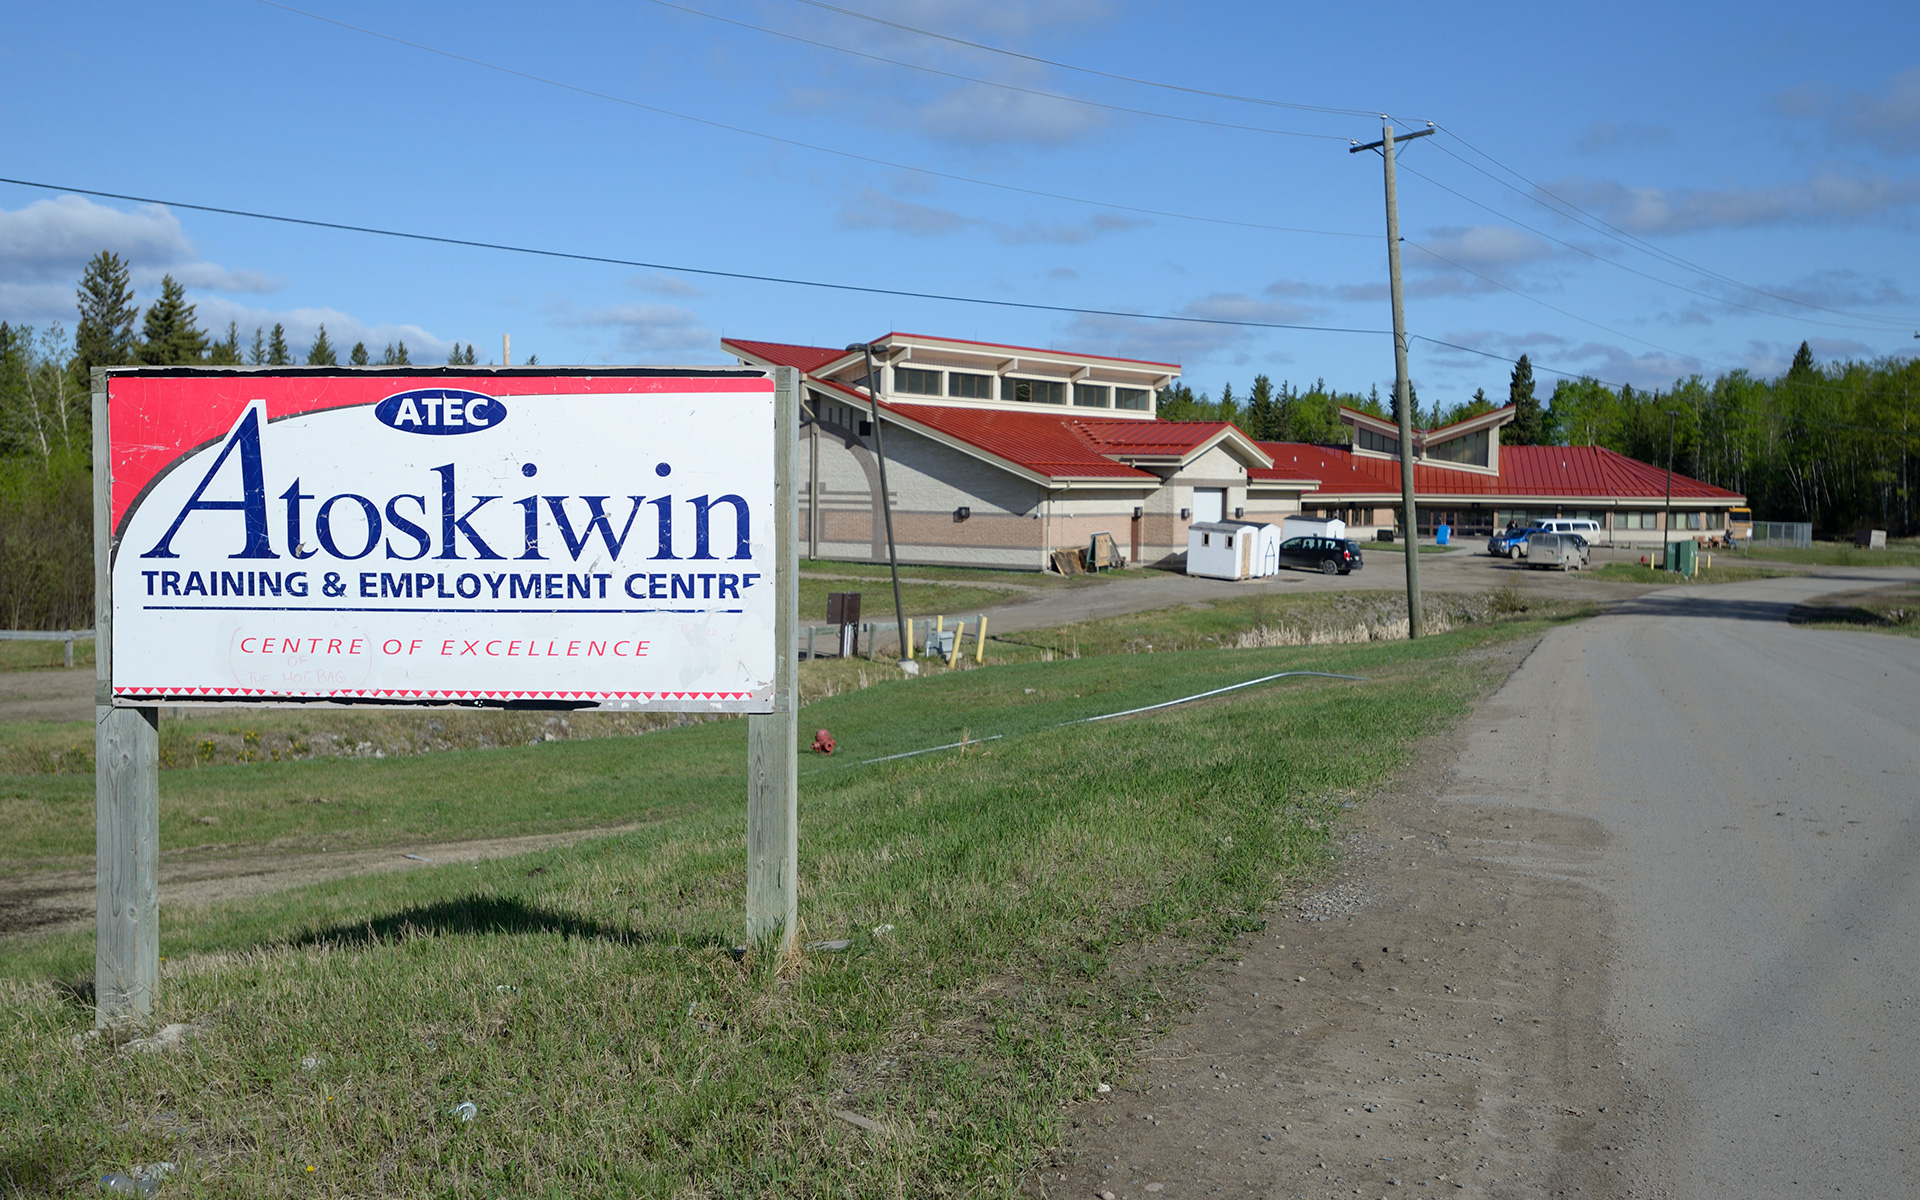 Atoskiwin Training and Employment Centre of Excellence